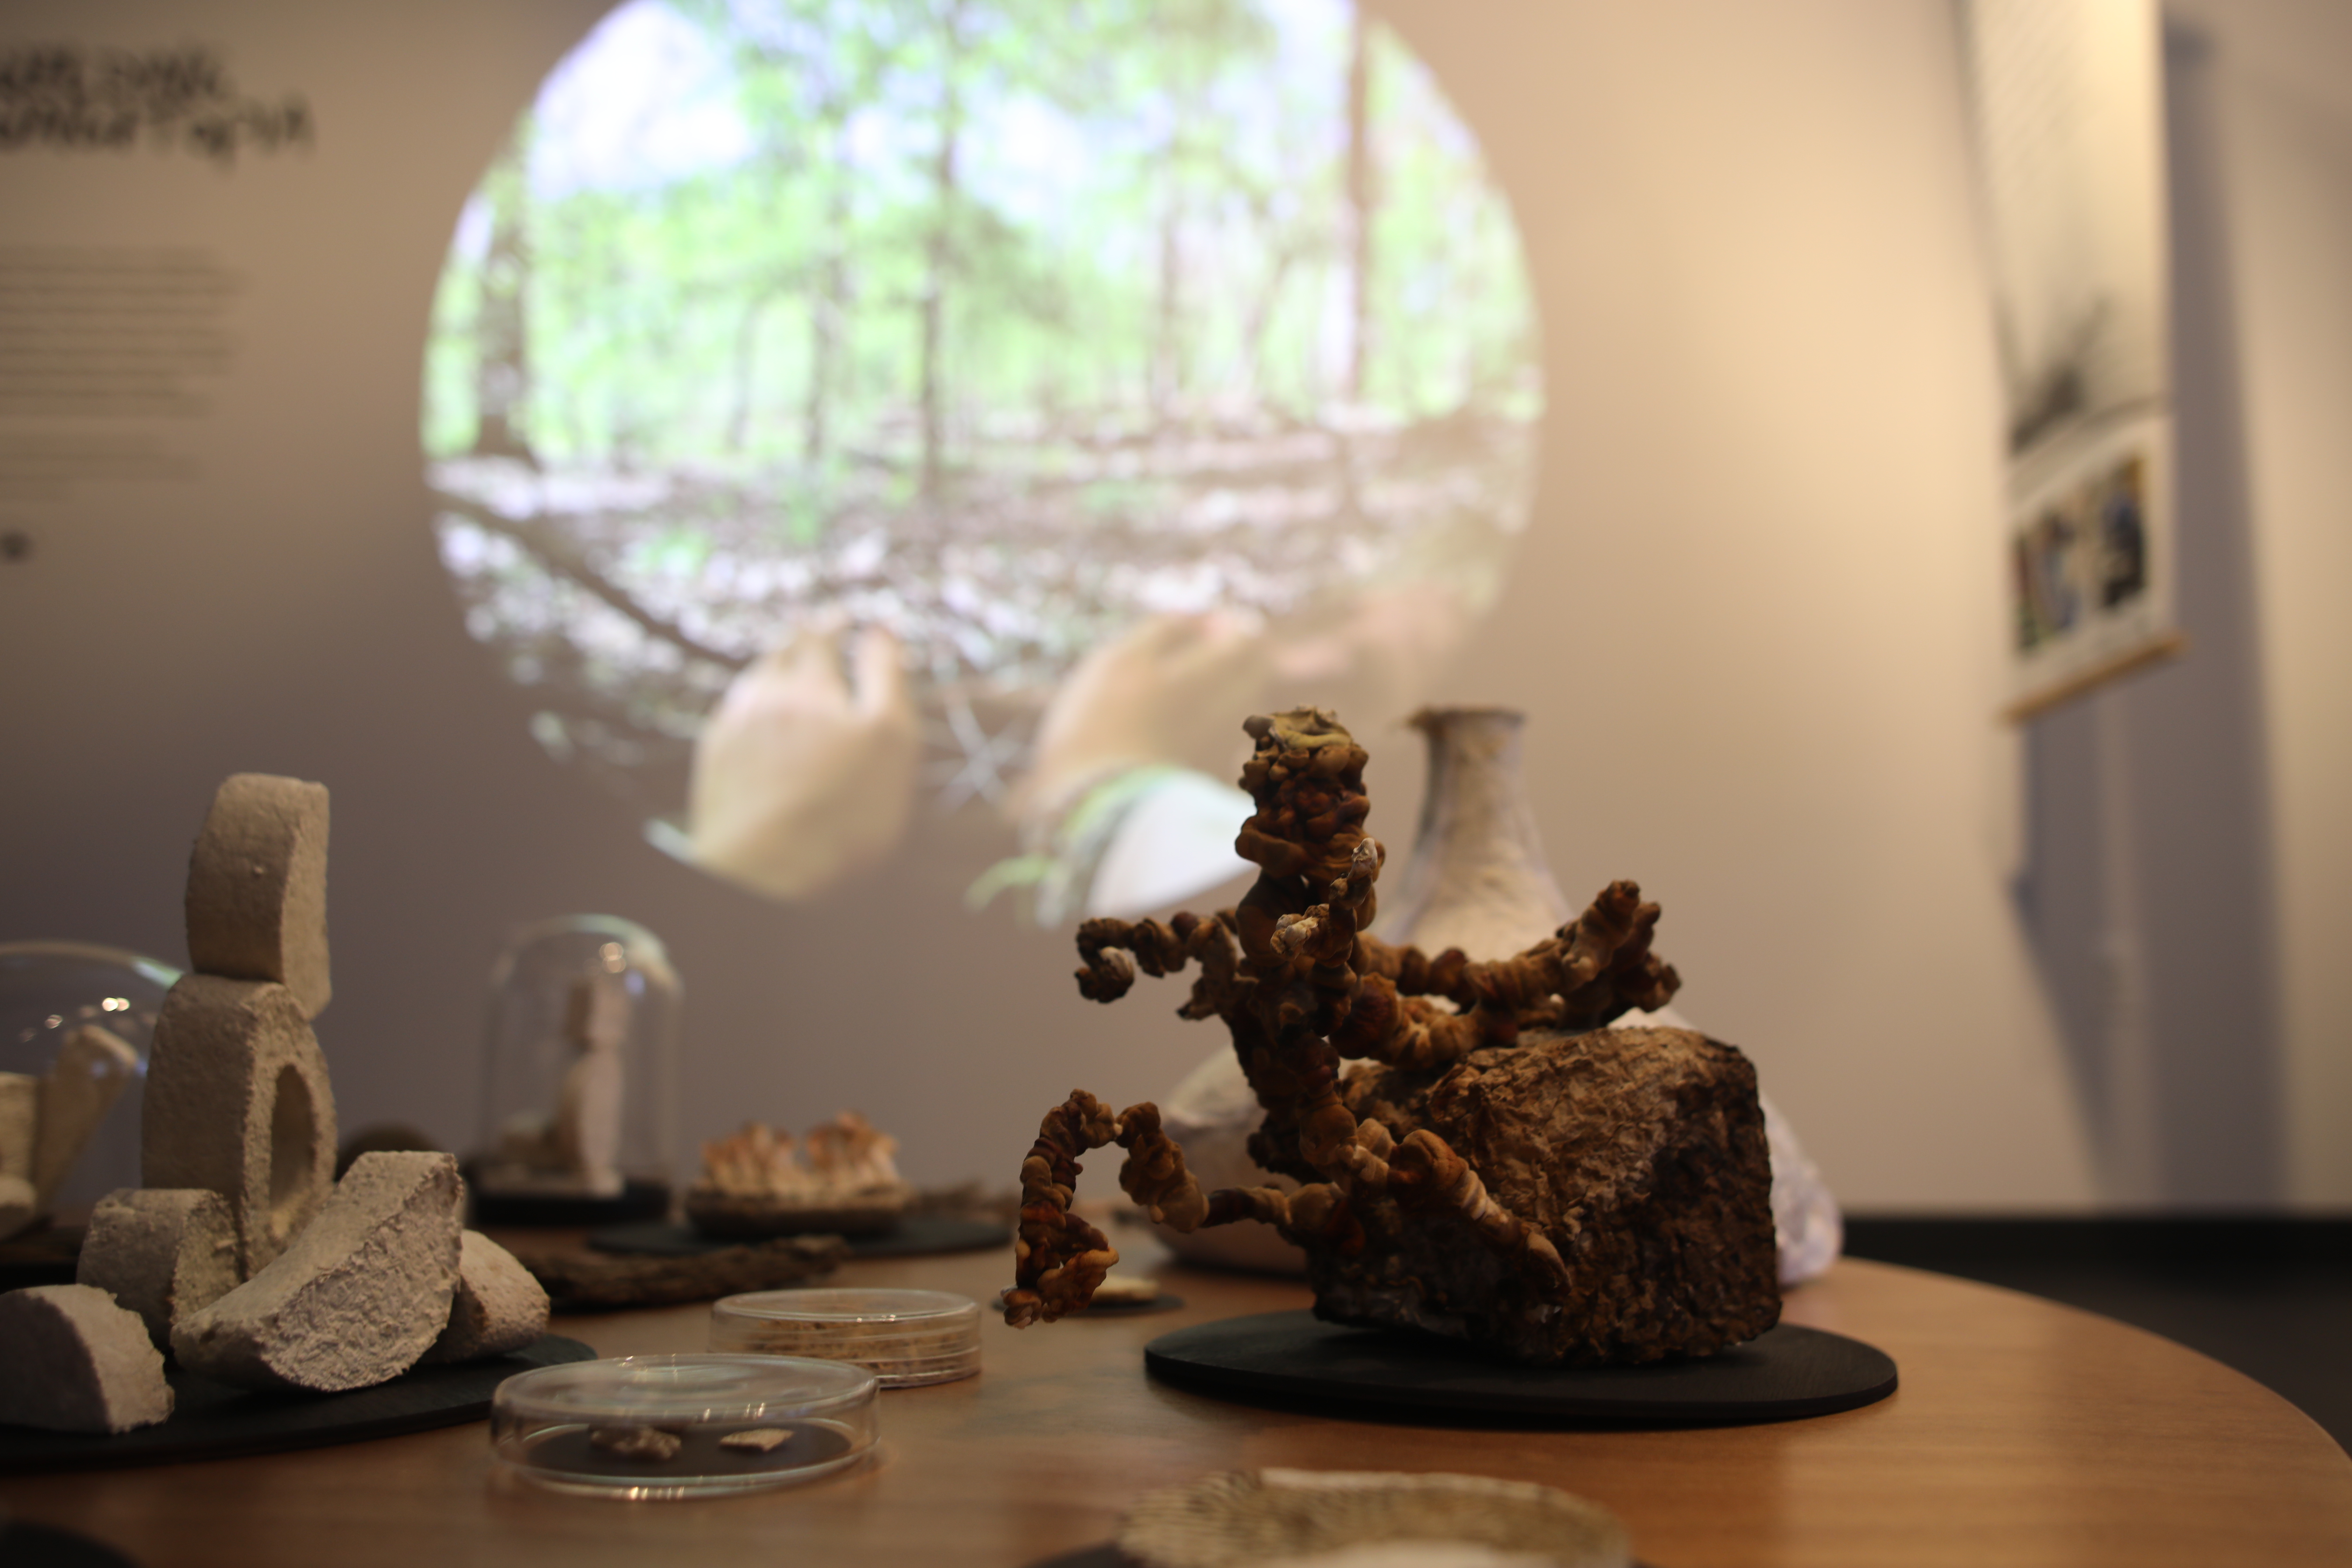 sculptures grown from mushrooms and mycelium in front of circular projected video of hands 